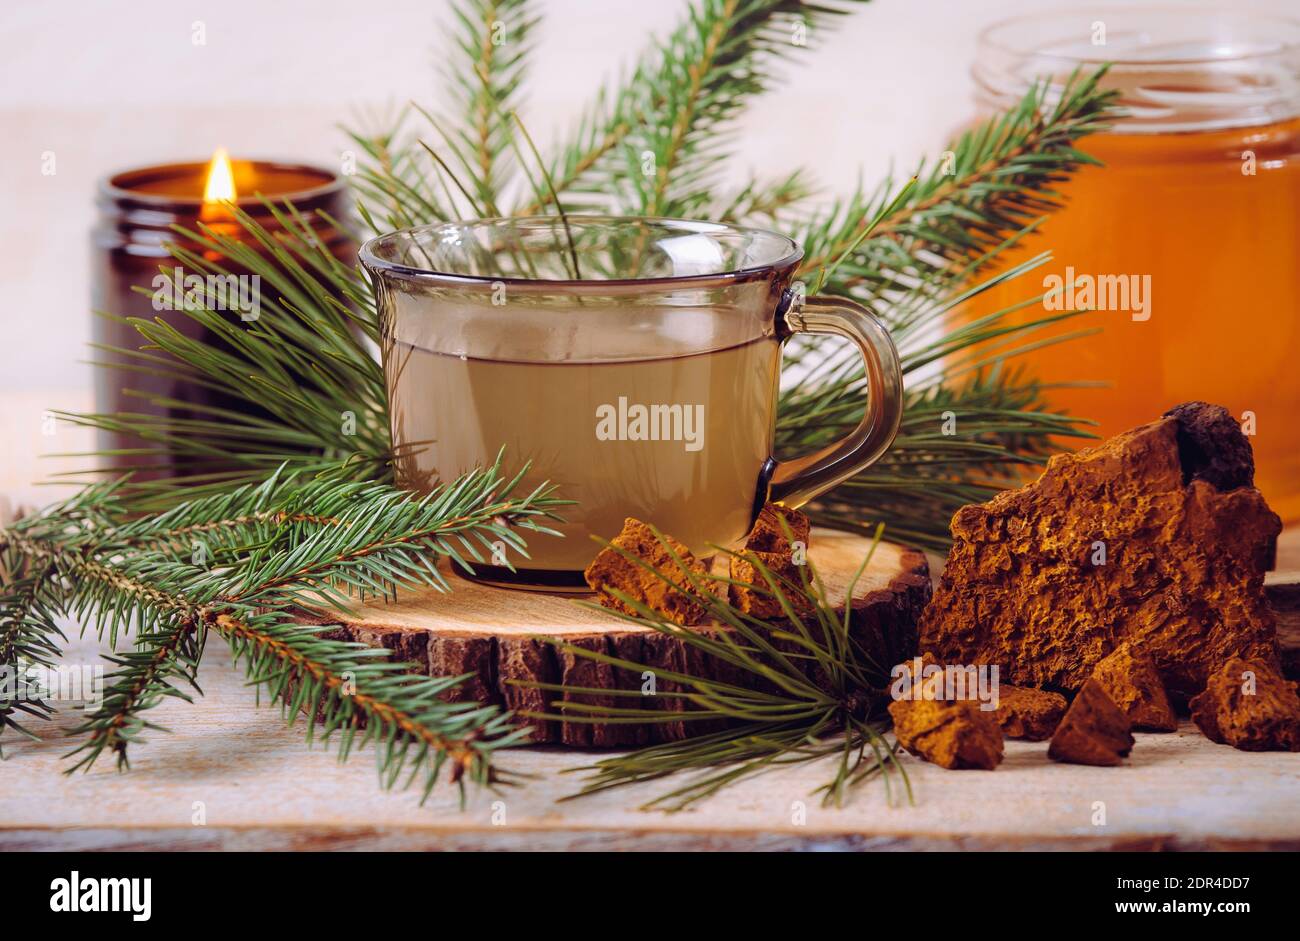 Spruce and pine needle tea with chaga mushroom Inonotus obliquus powder and honey. Tree branches and pieces of Chaga for decoration. Indoors home. Stock Photo